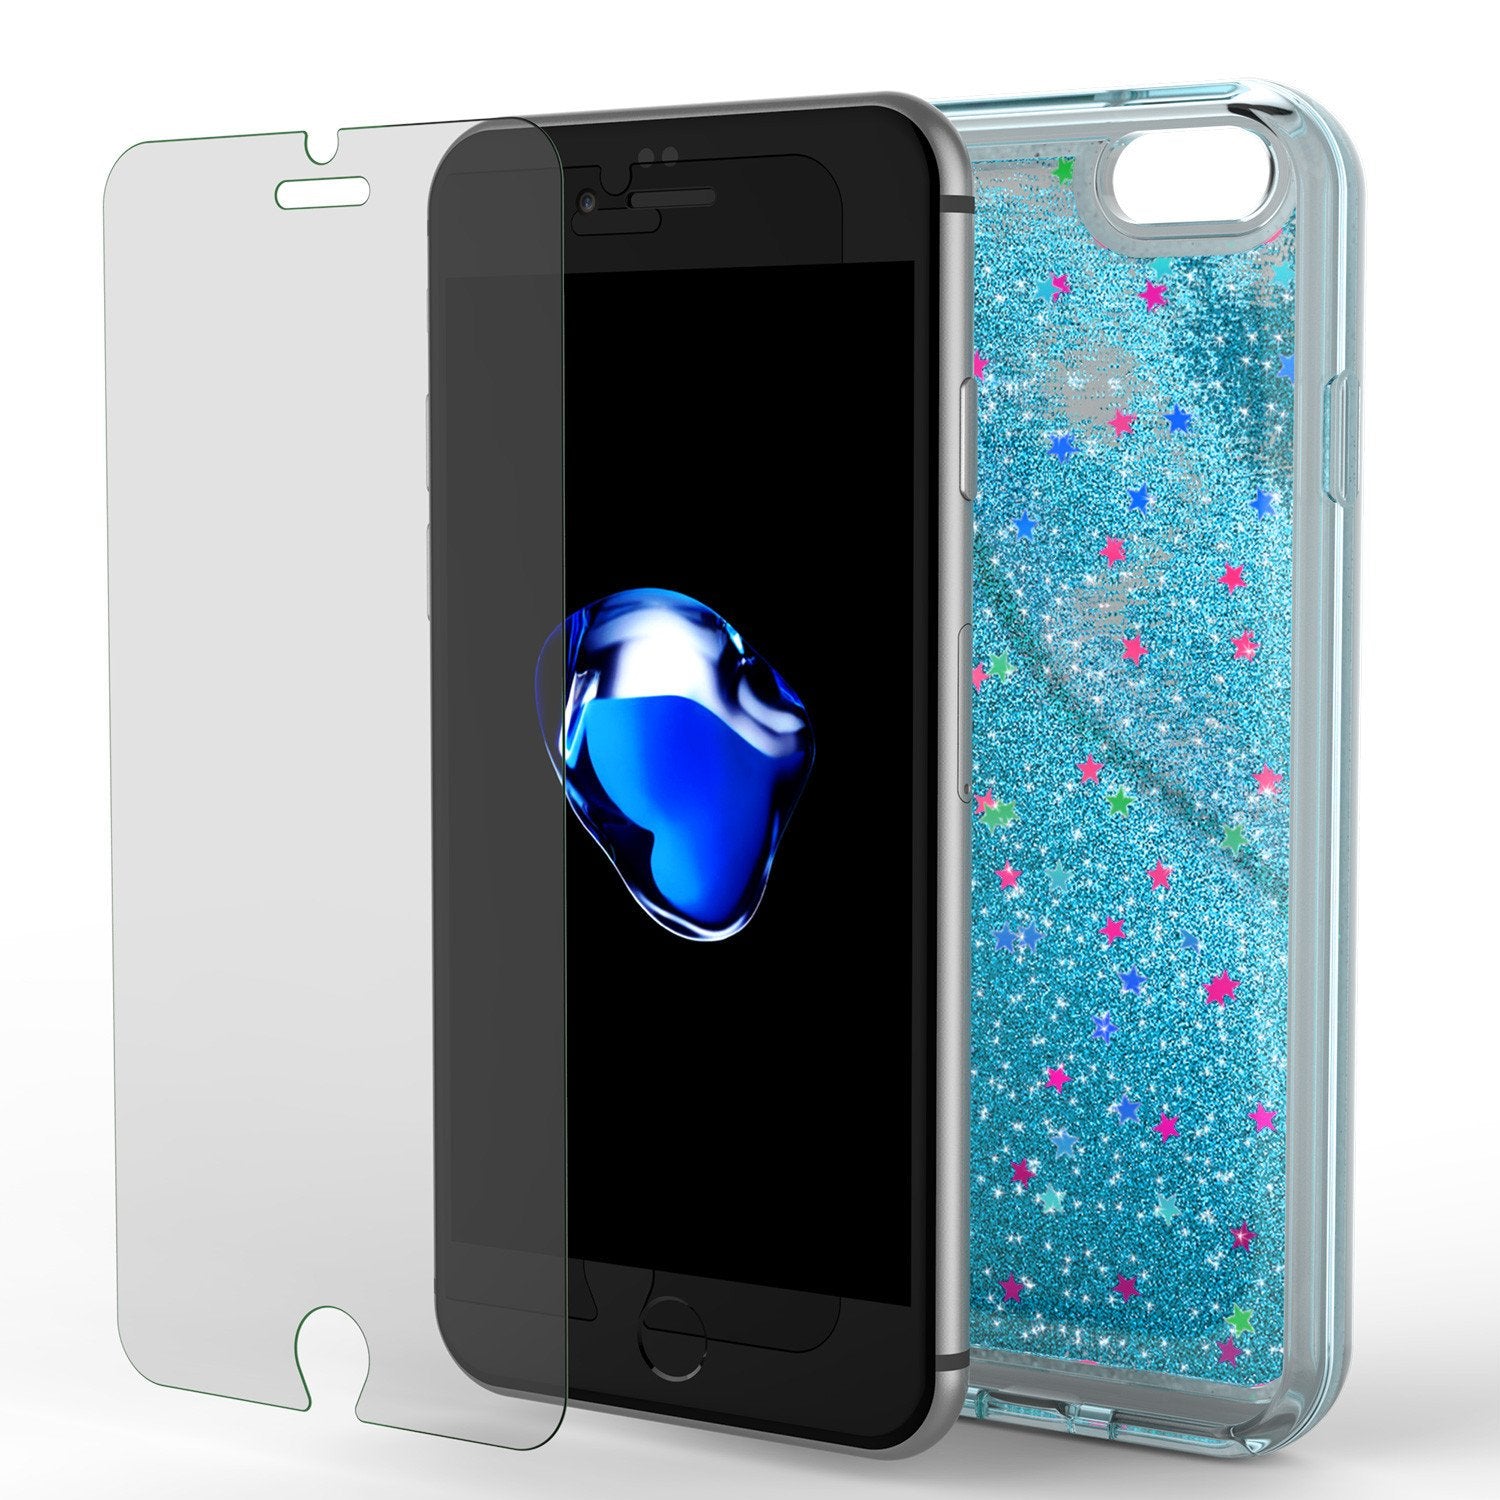 iPhone 7 Case, Punkcase [Liquid Teal Series] Protective Dual Layer Floating Glitter Cover with lots of Bling & Sparkle + 0.3mm Tempered Glass Screen Protector for Apple iPhone 7s